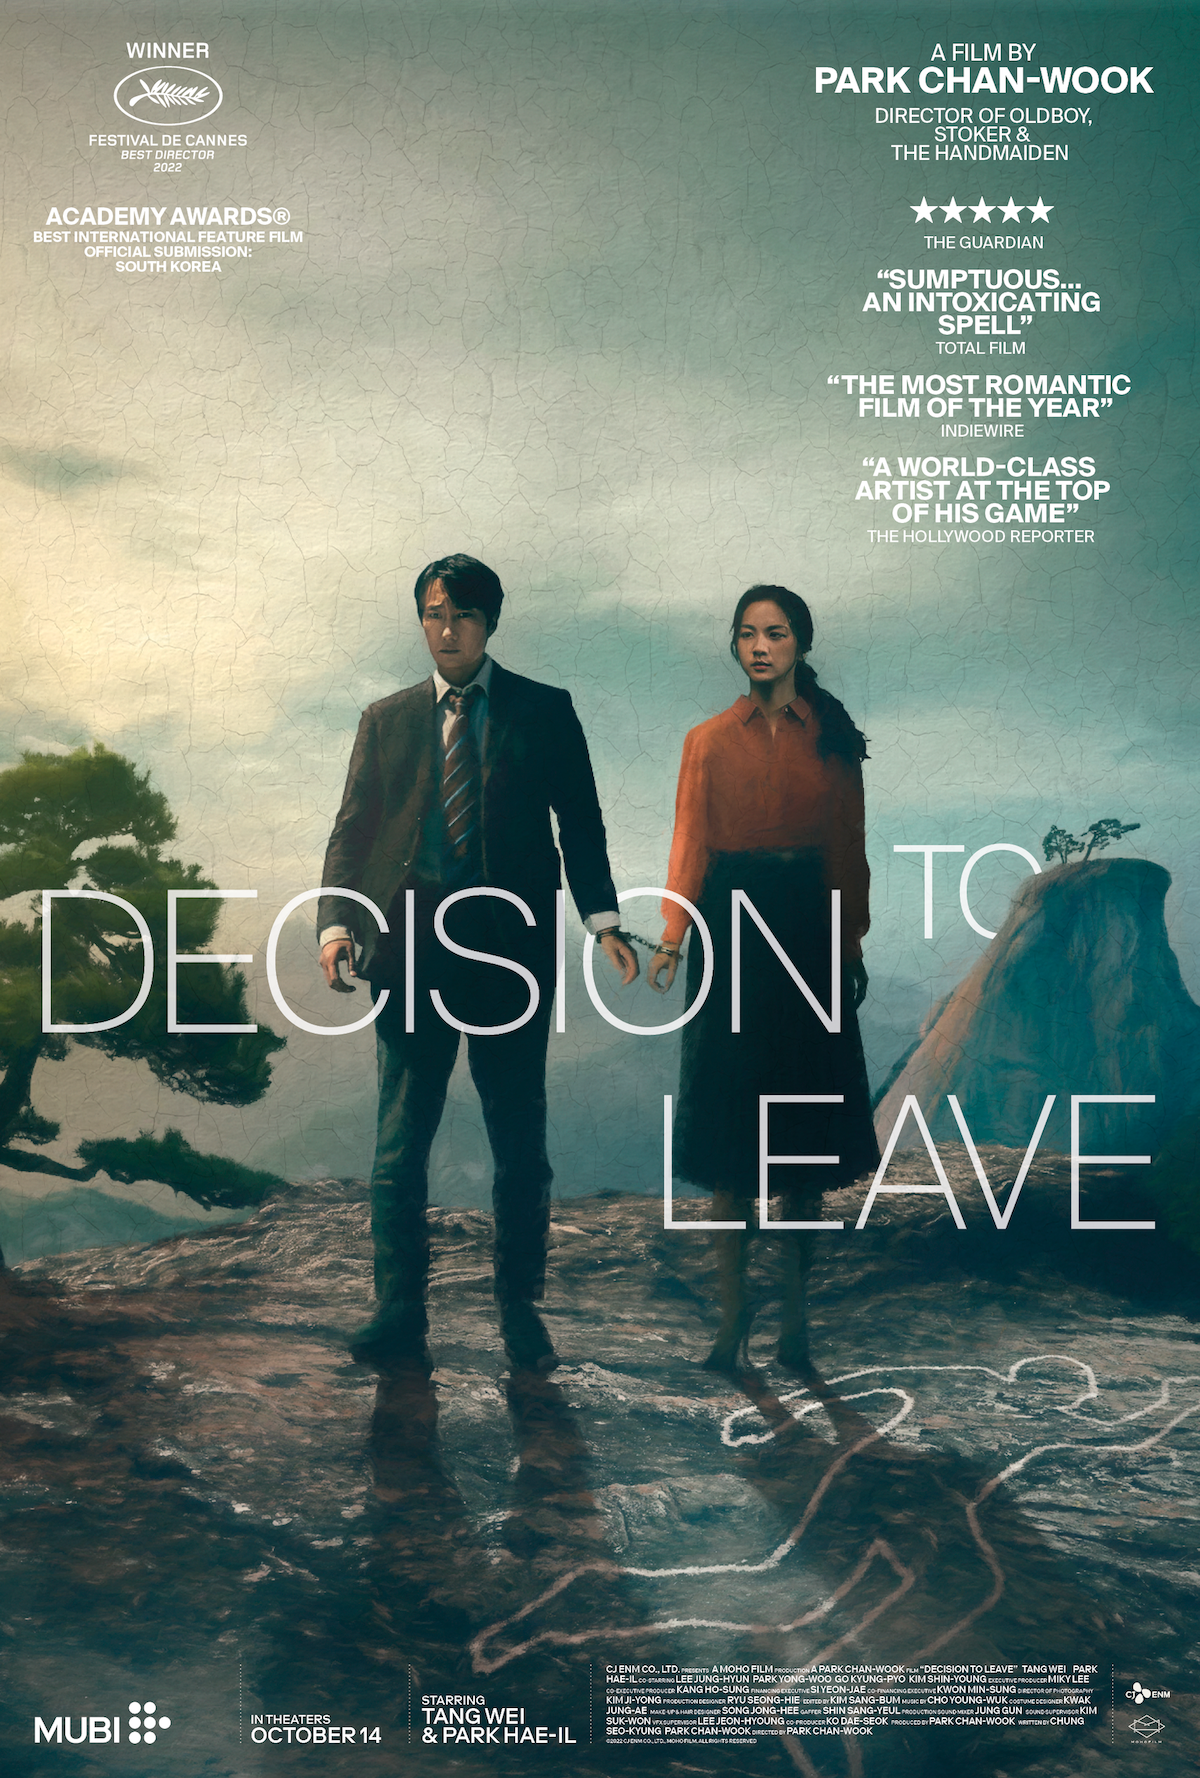 Park Chan-wook’s DECISION TO LEAVE- In Theaters Friday, October 14th